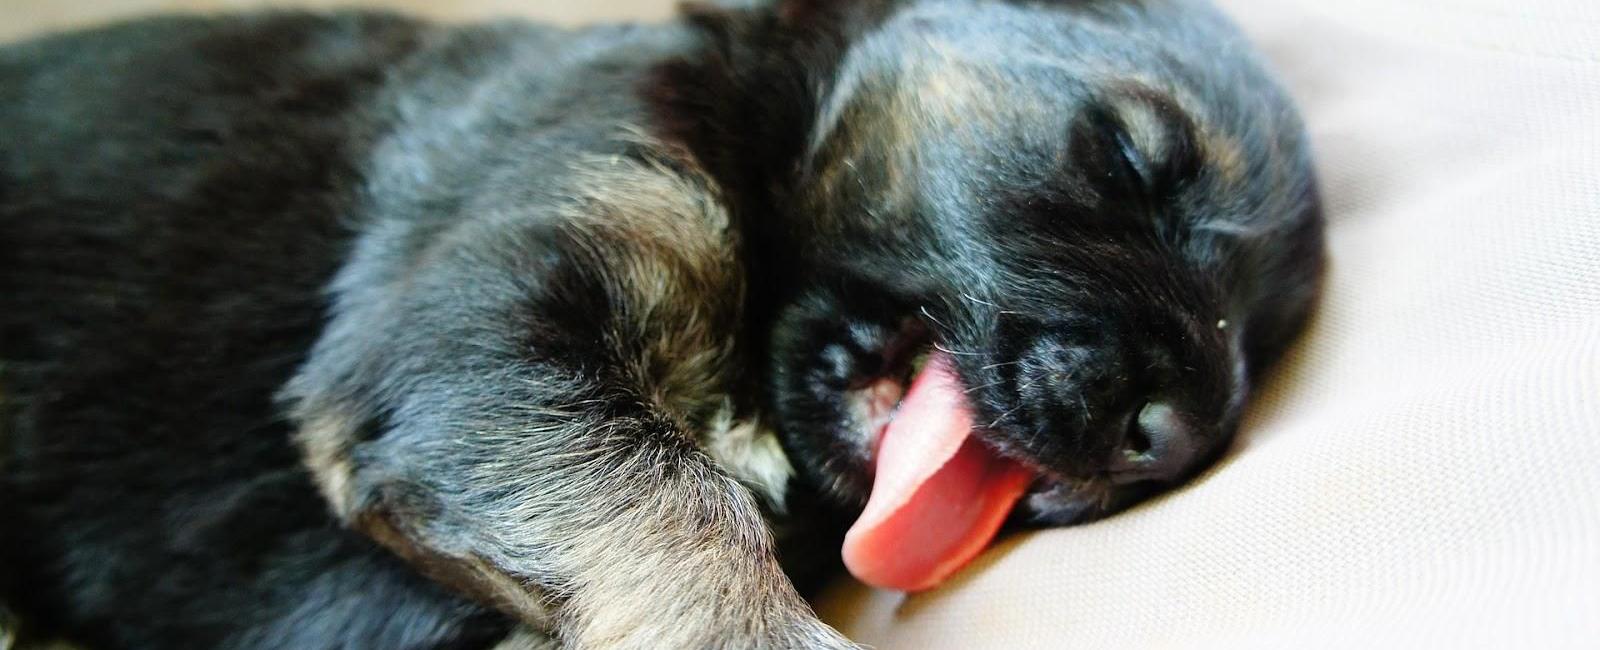 Why Do Dogs Sleep with Their Tongue Out?